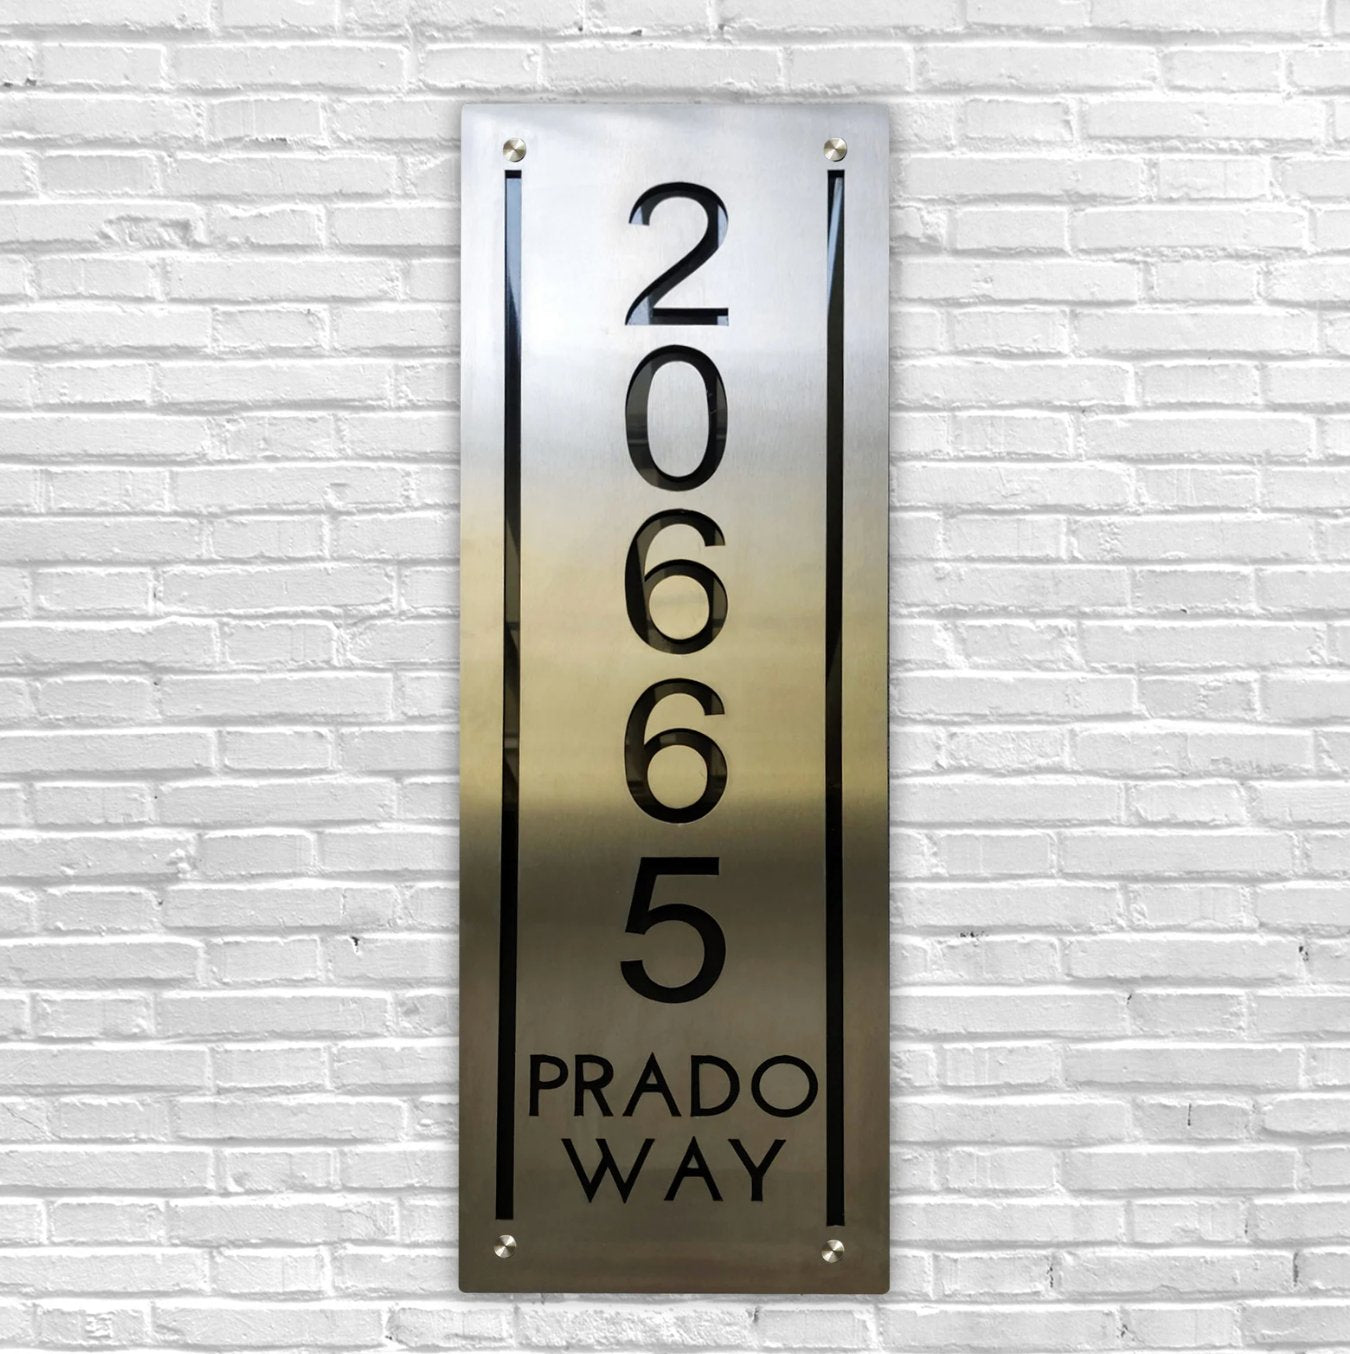 Stunning Vertical Lighted House Numbers Address Sign with Solar and Electric Options, Waterproof, Stainless Steel or Aluminum Plates, Super Bright LED's, Made in Florida, USA